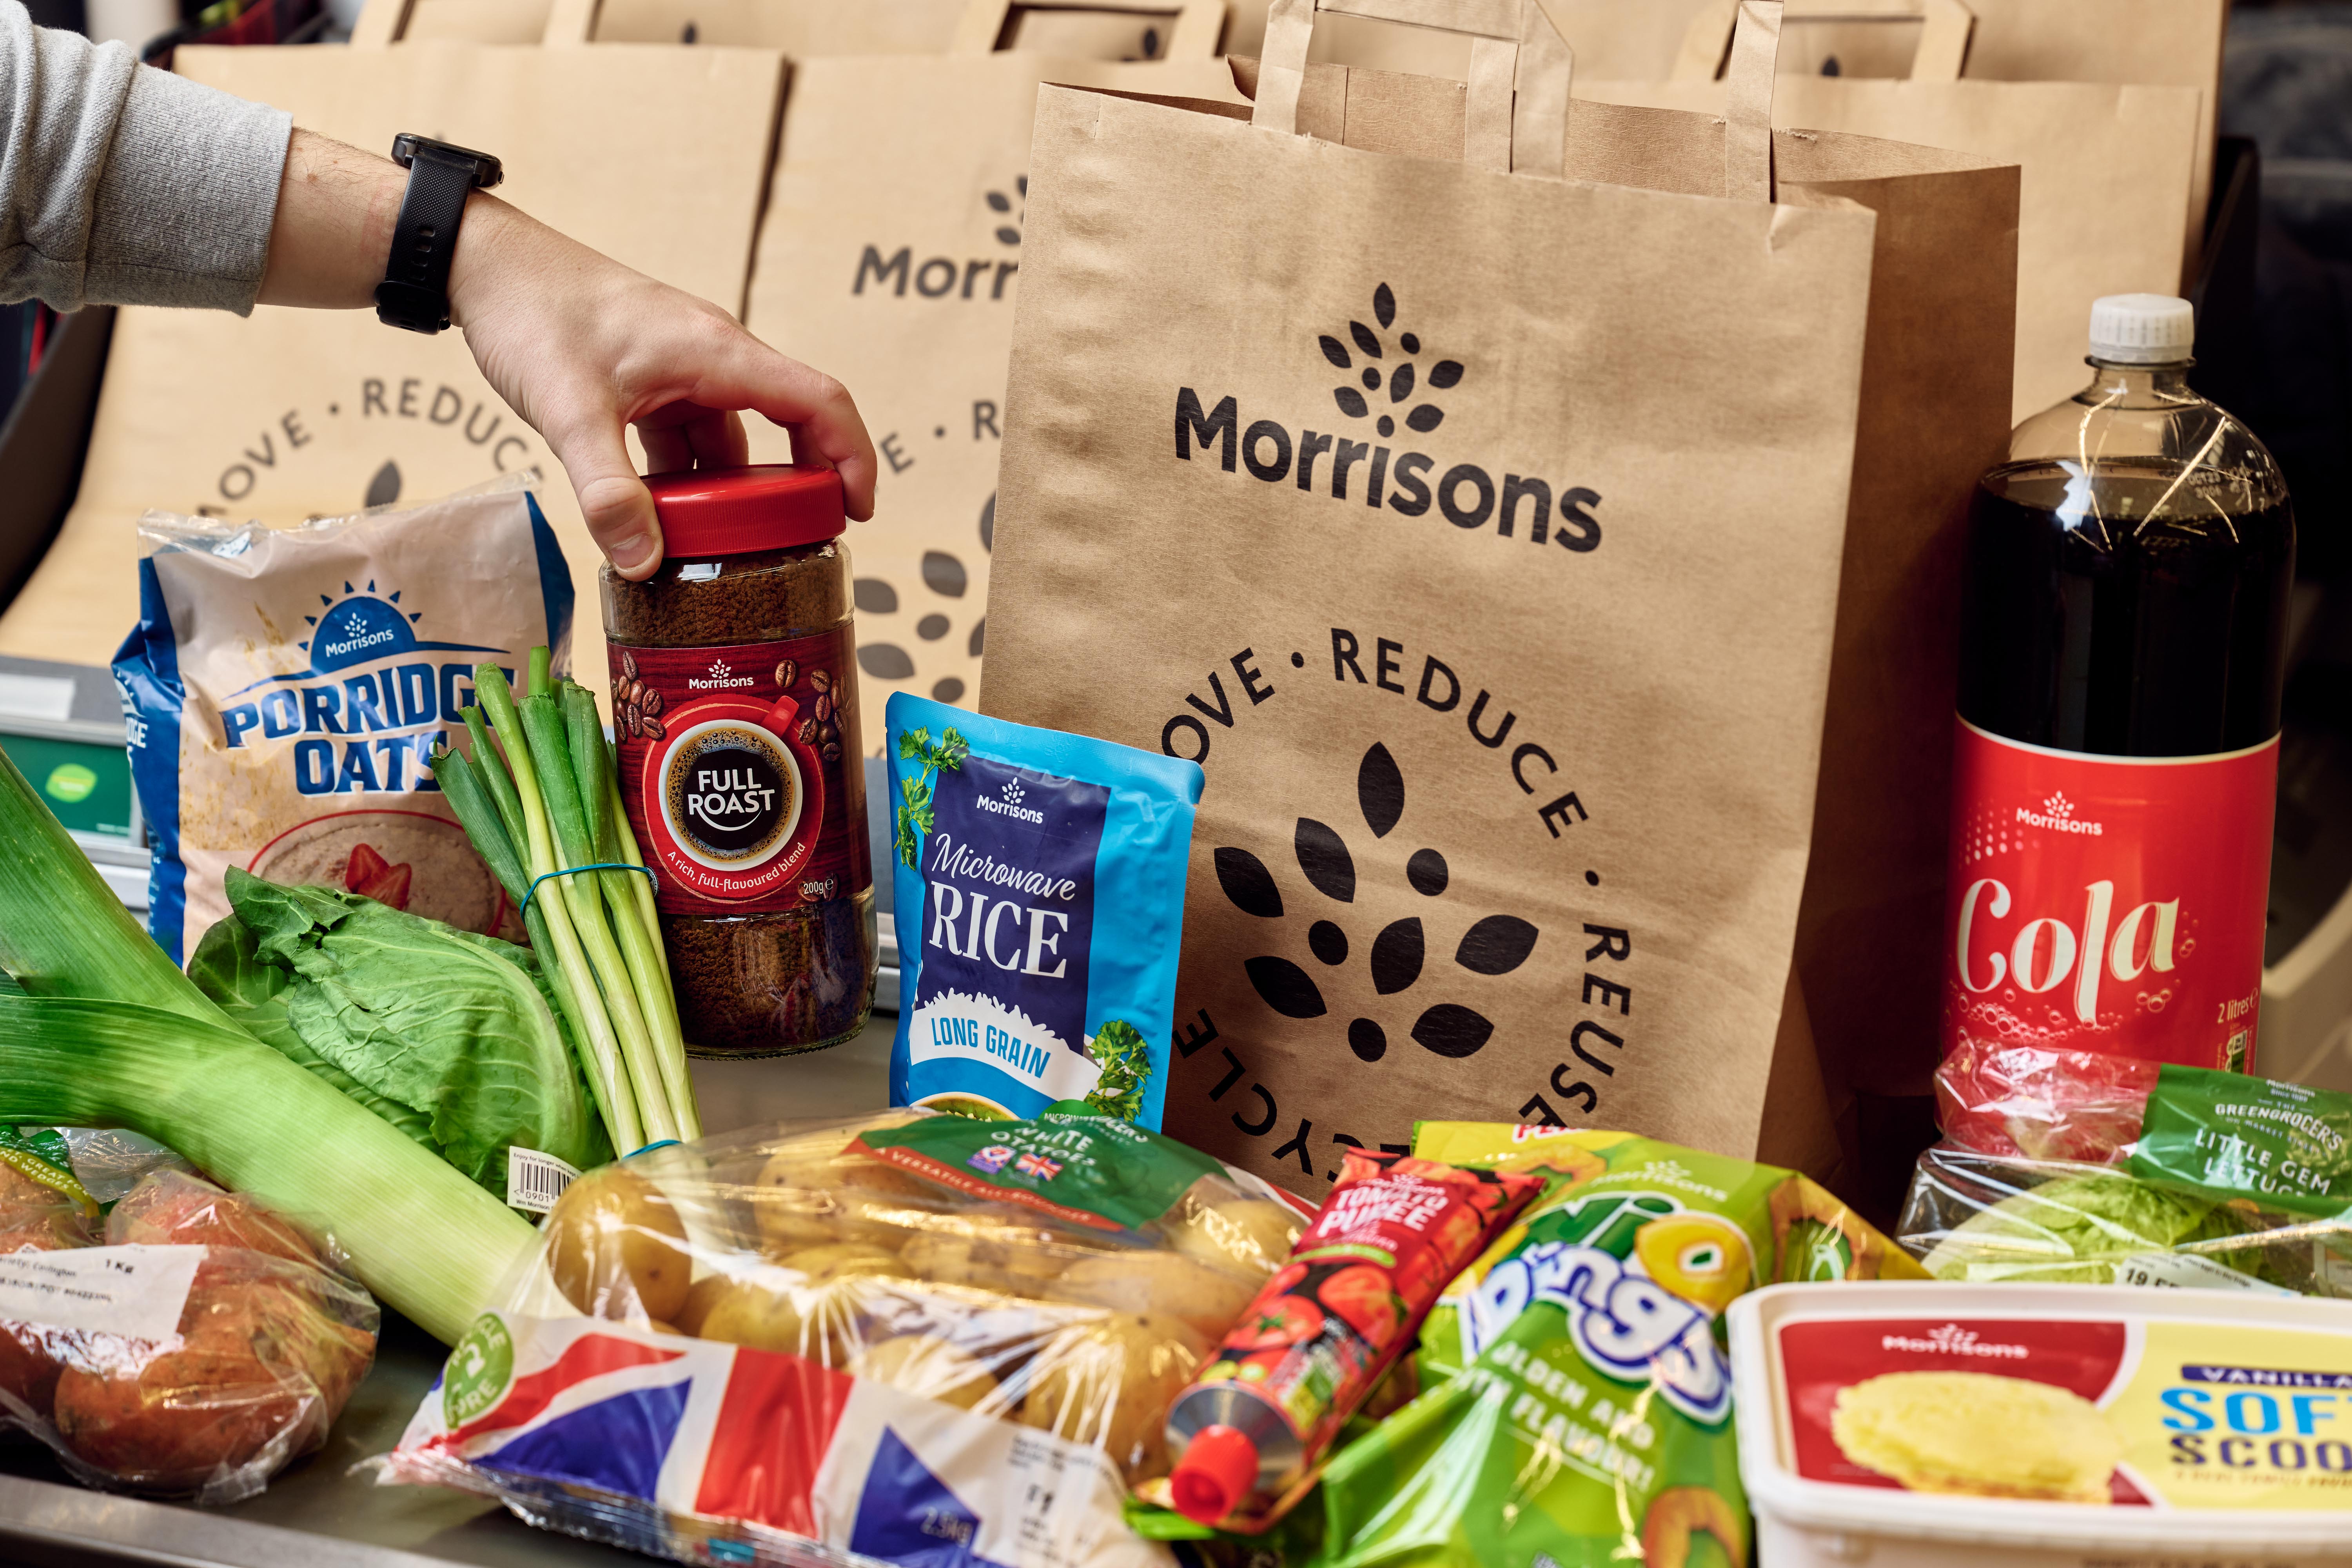 Morrisons invests a further £25m in price cuts